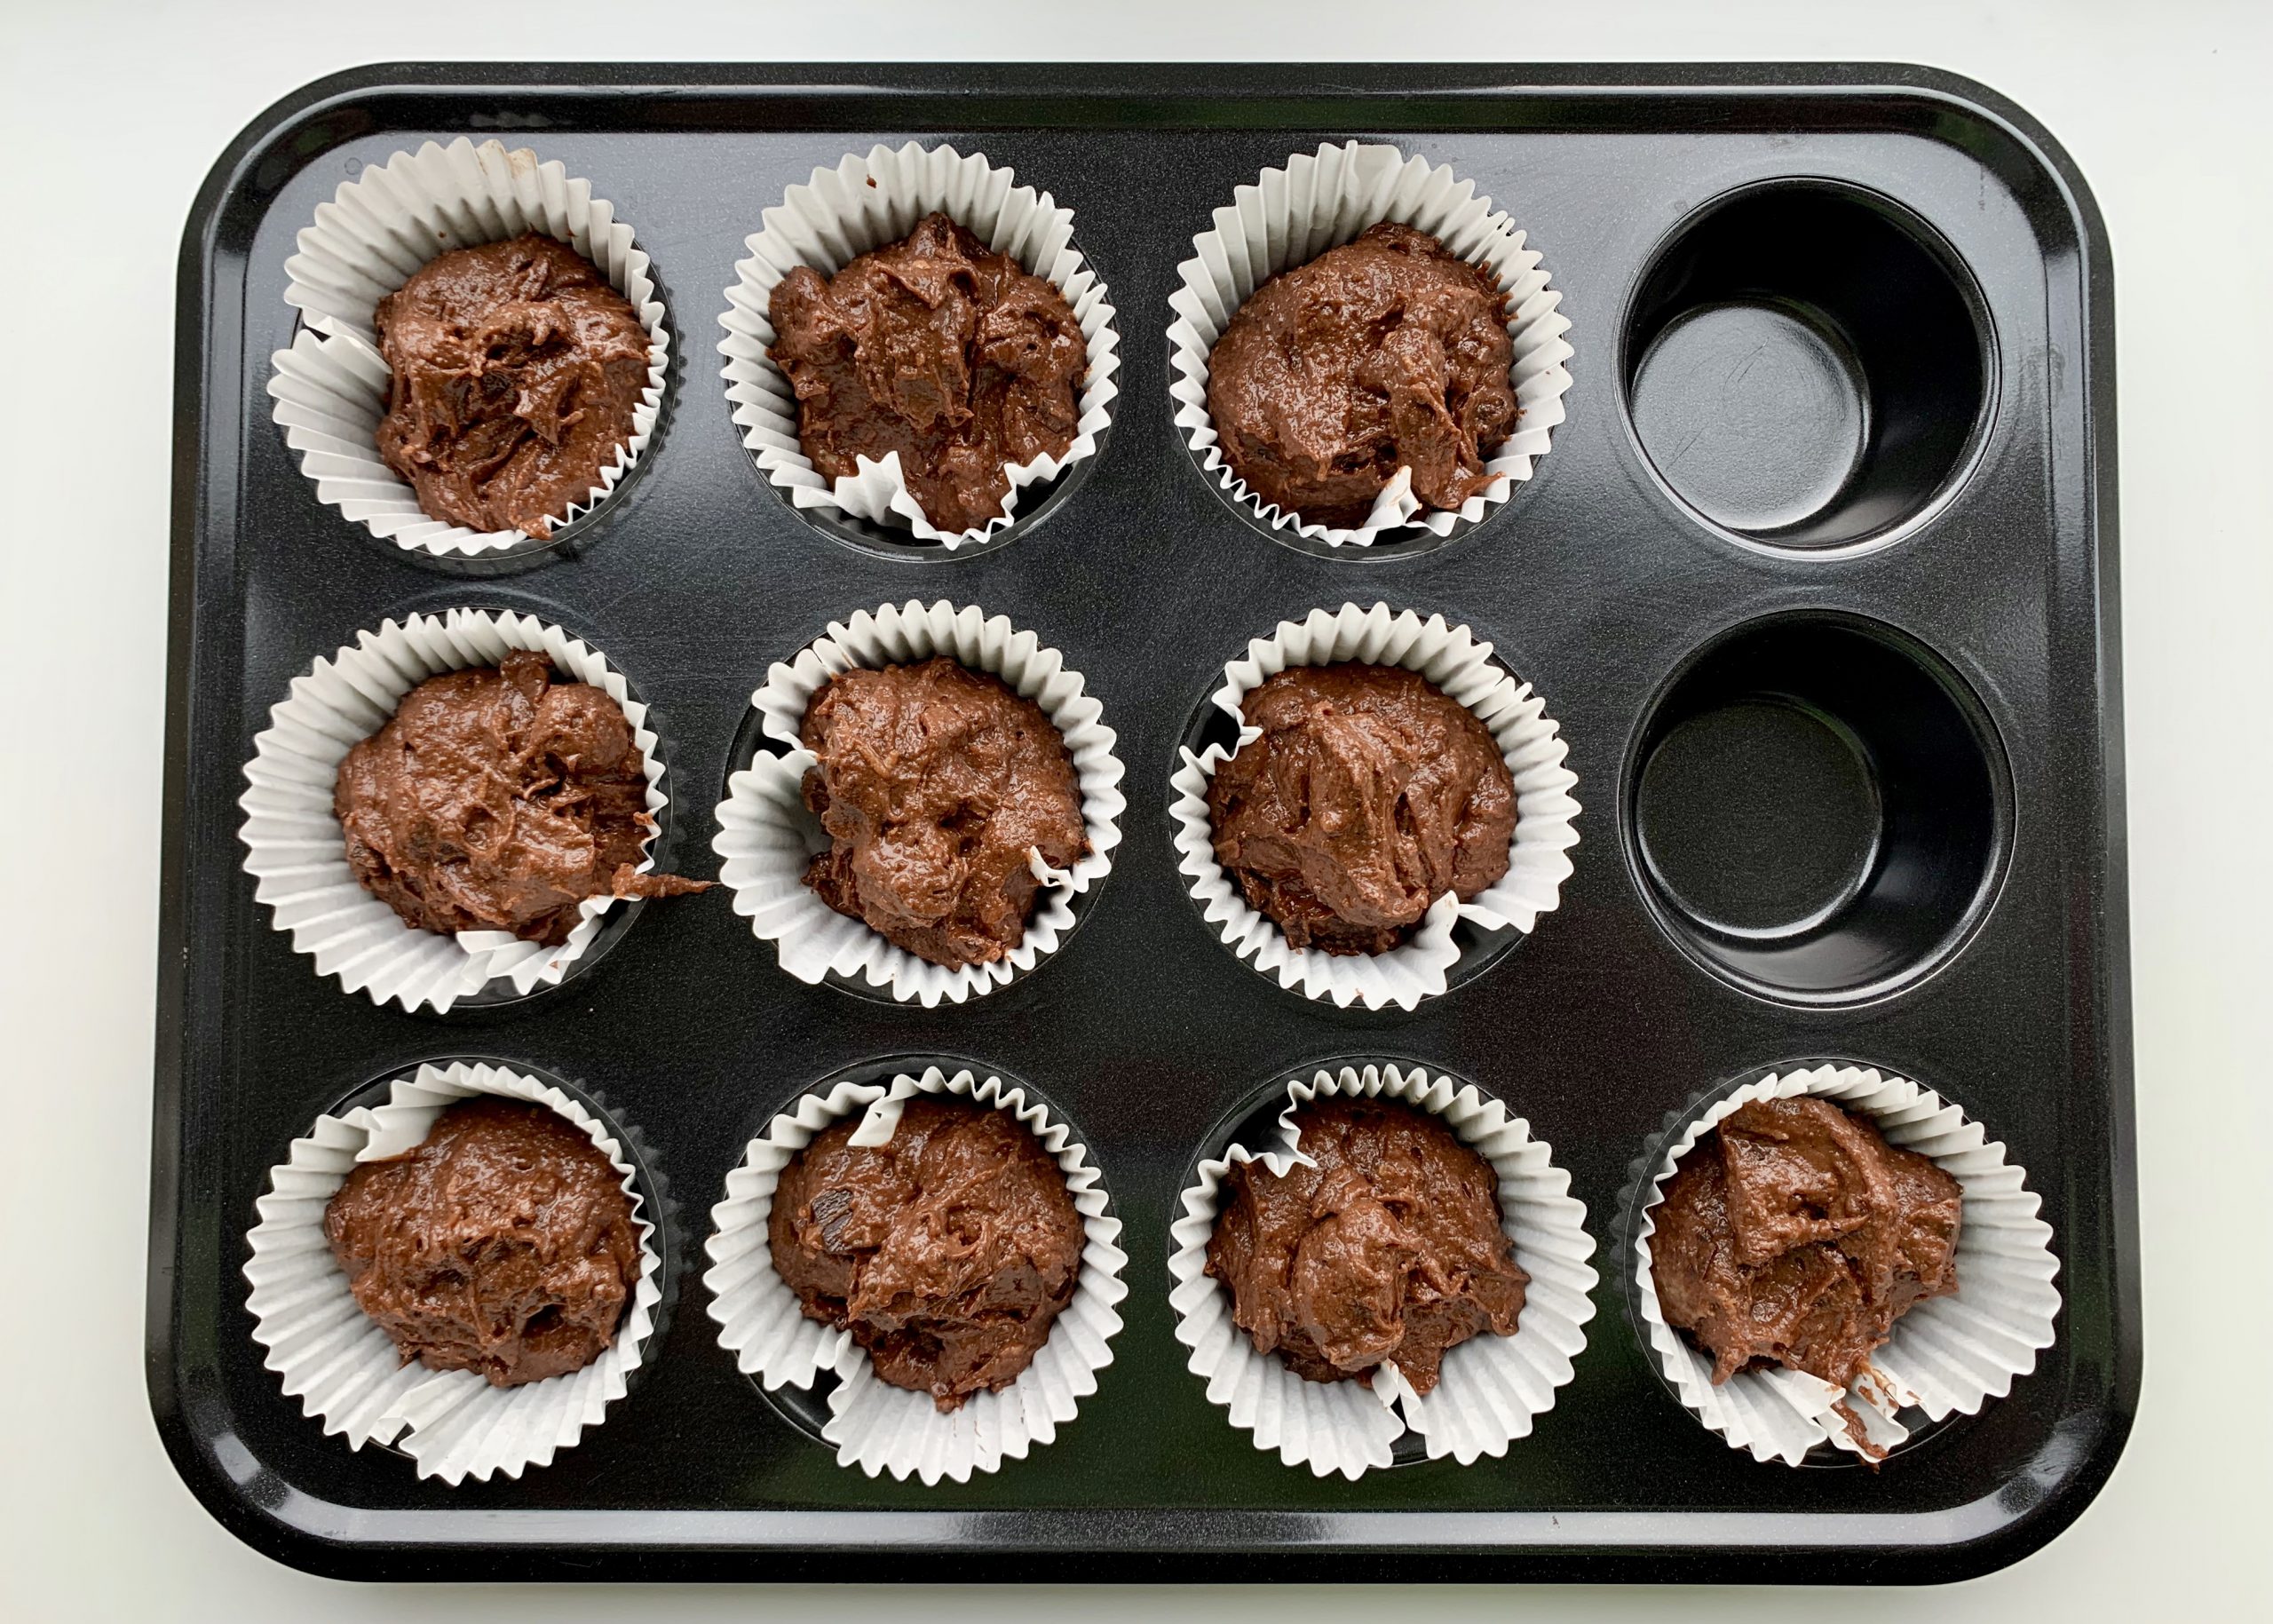 Banana chocolate muffin mixture divided between 10 muffin cases